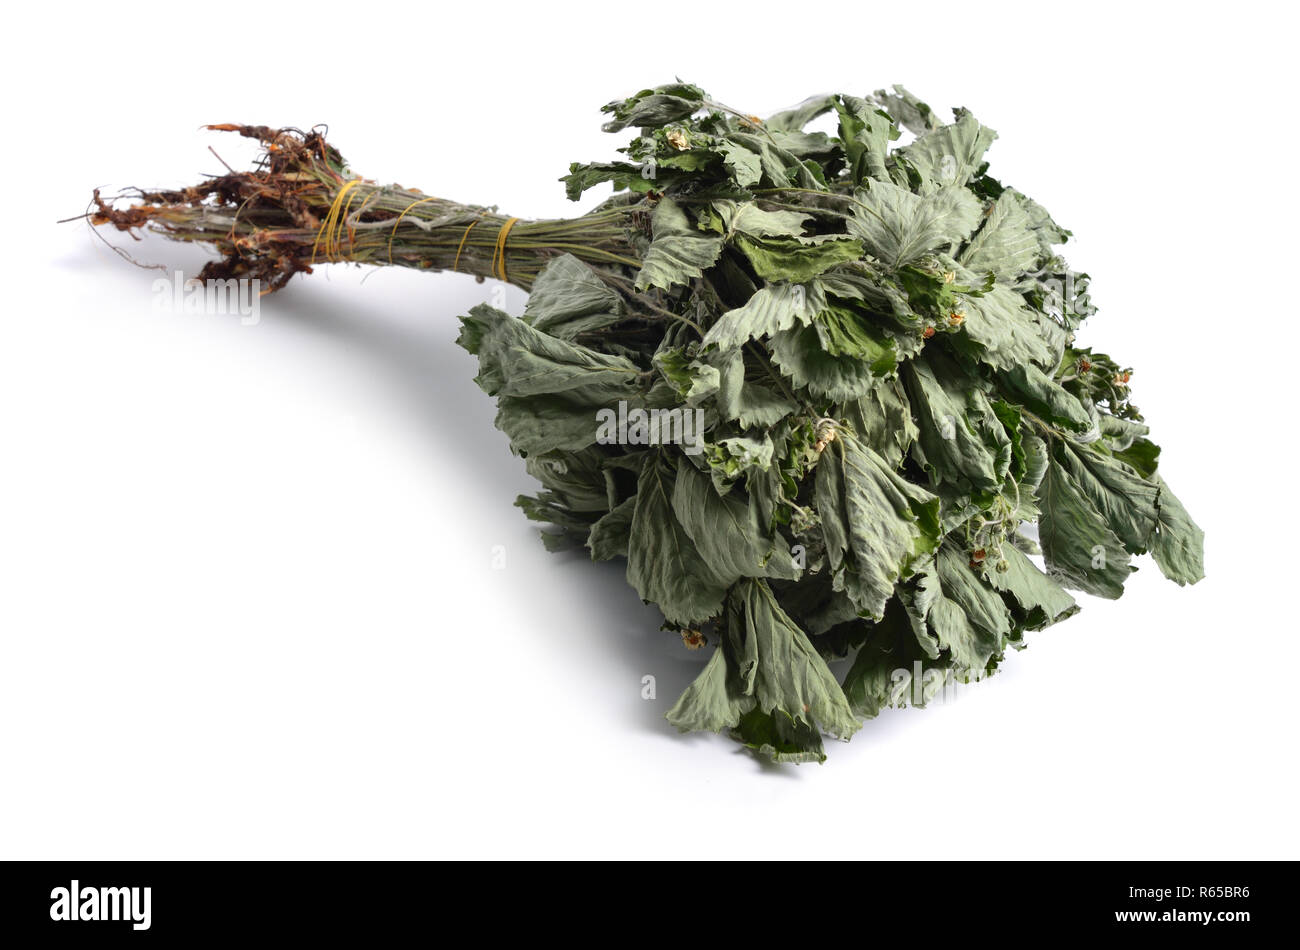 Dried medicinal herbs raw materials isolated on white. Fragaria. Stock Photo